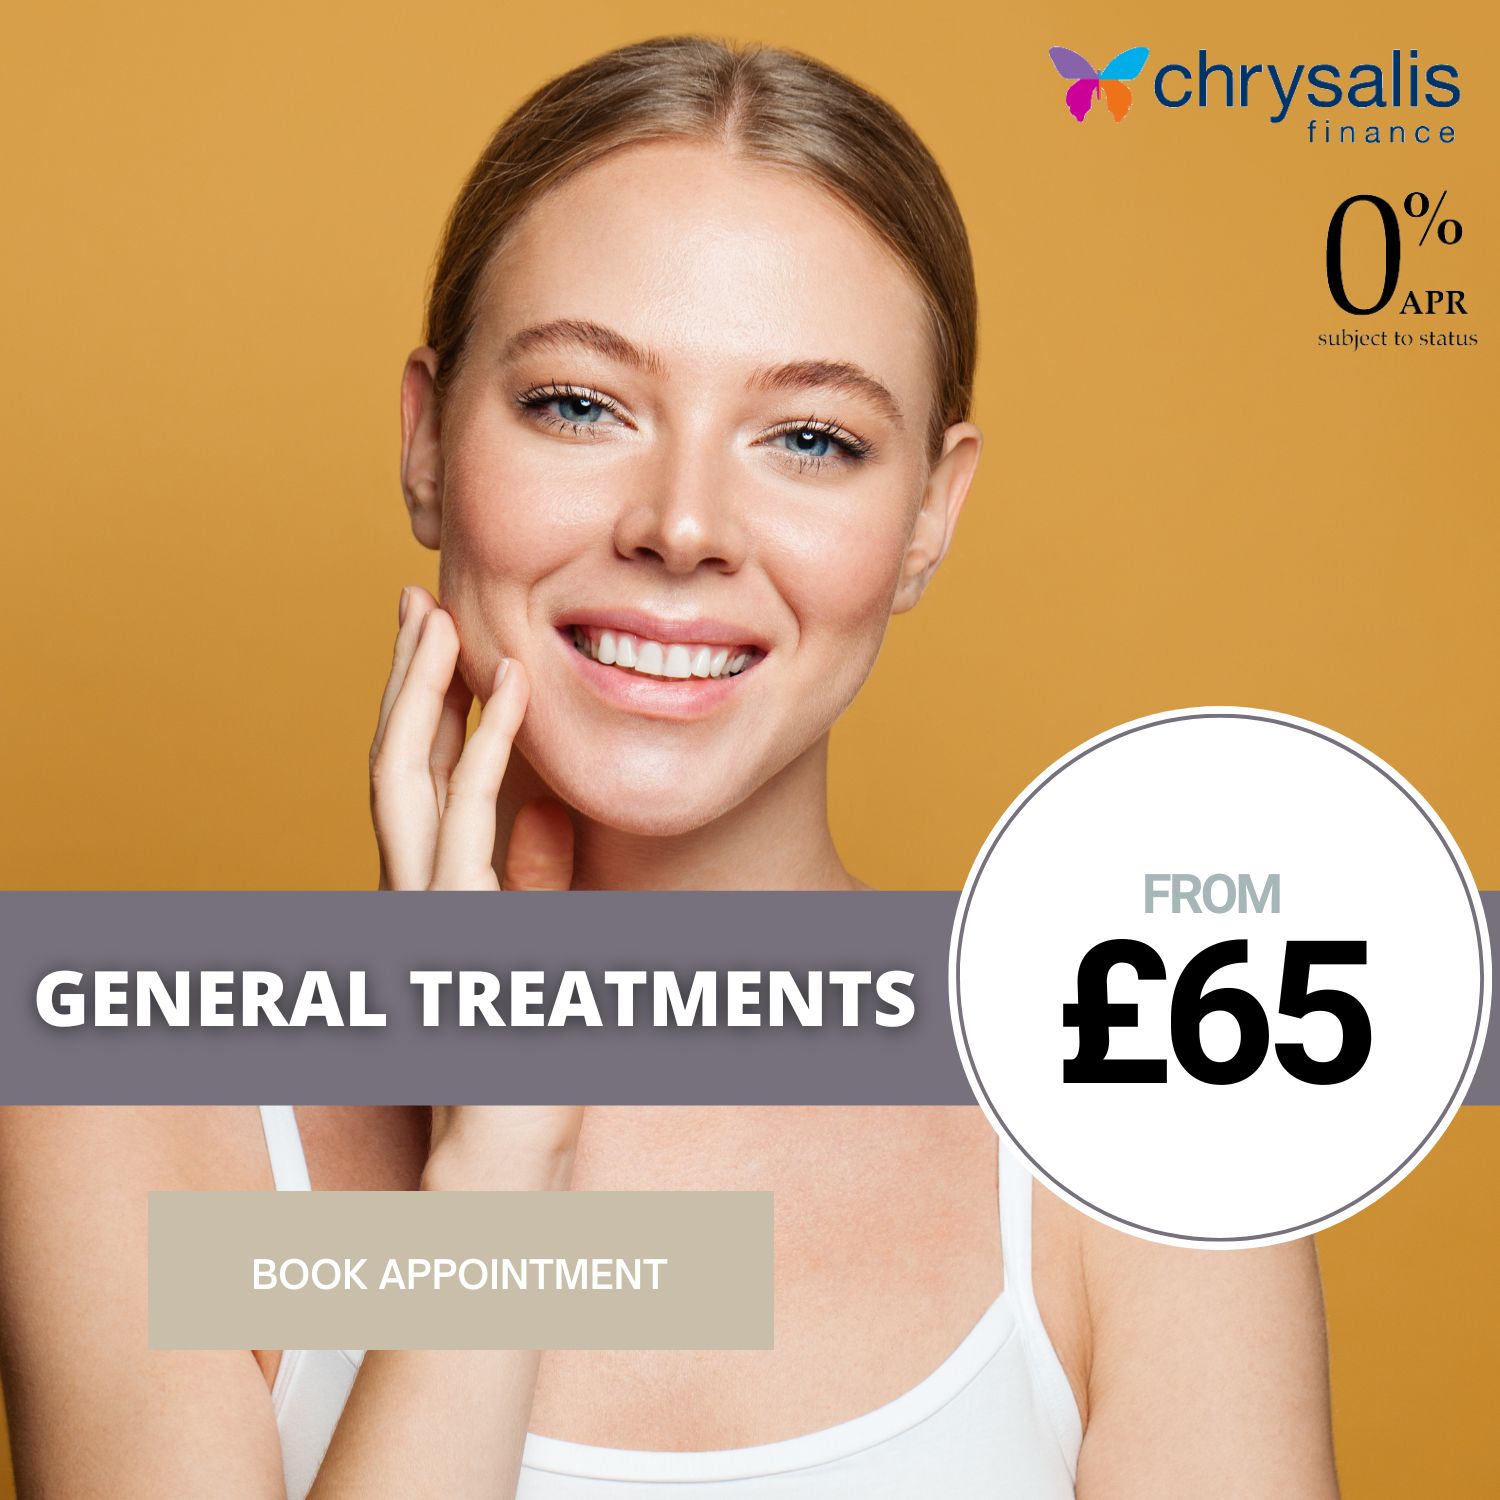 treatment offer price